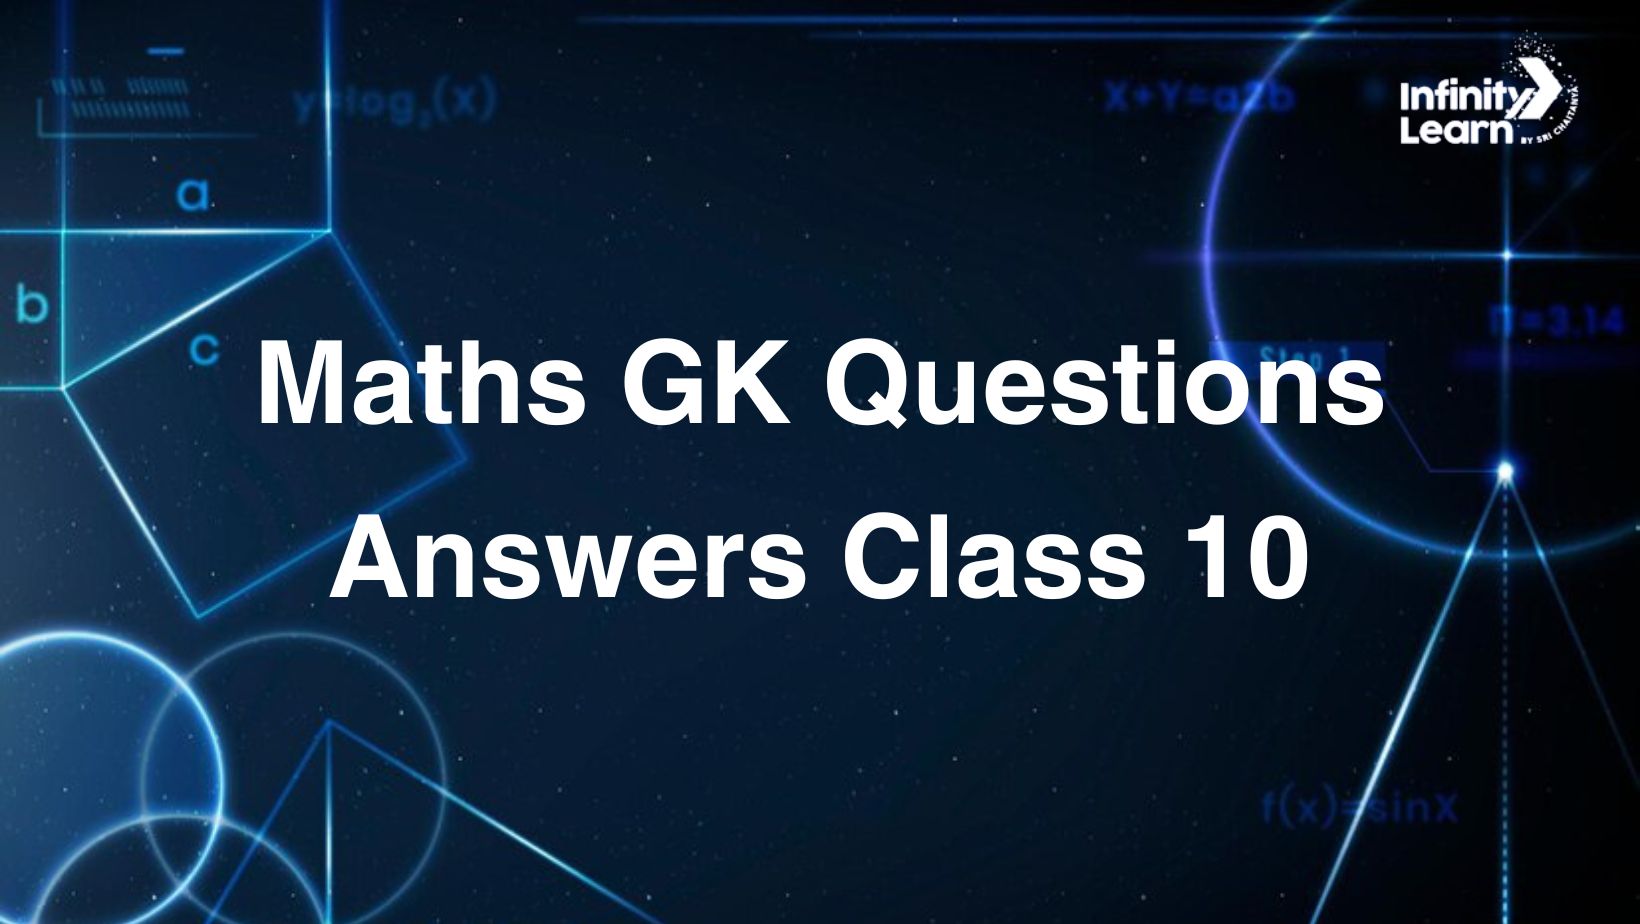 Maths GK Questions Answers Class 10